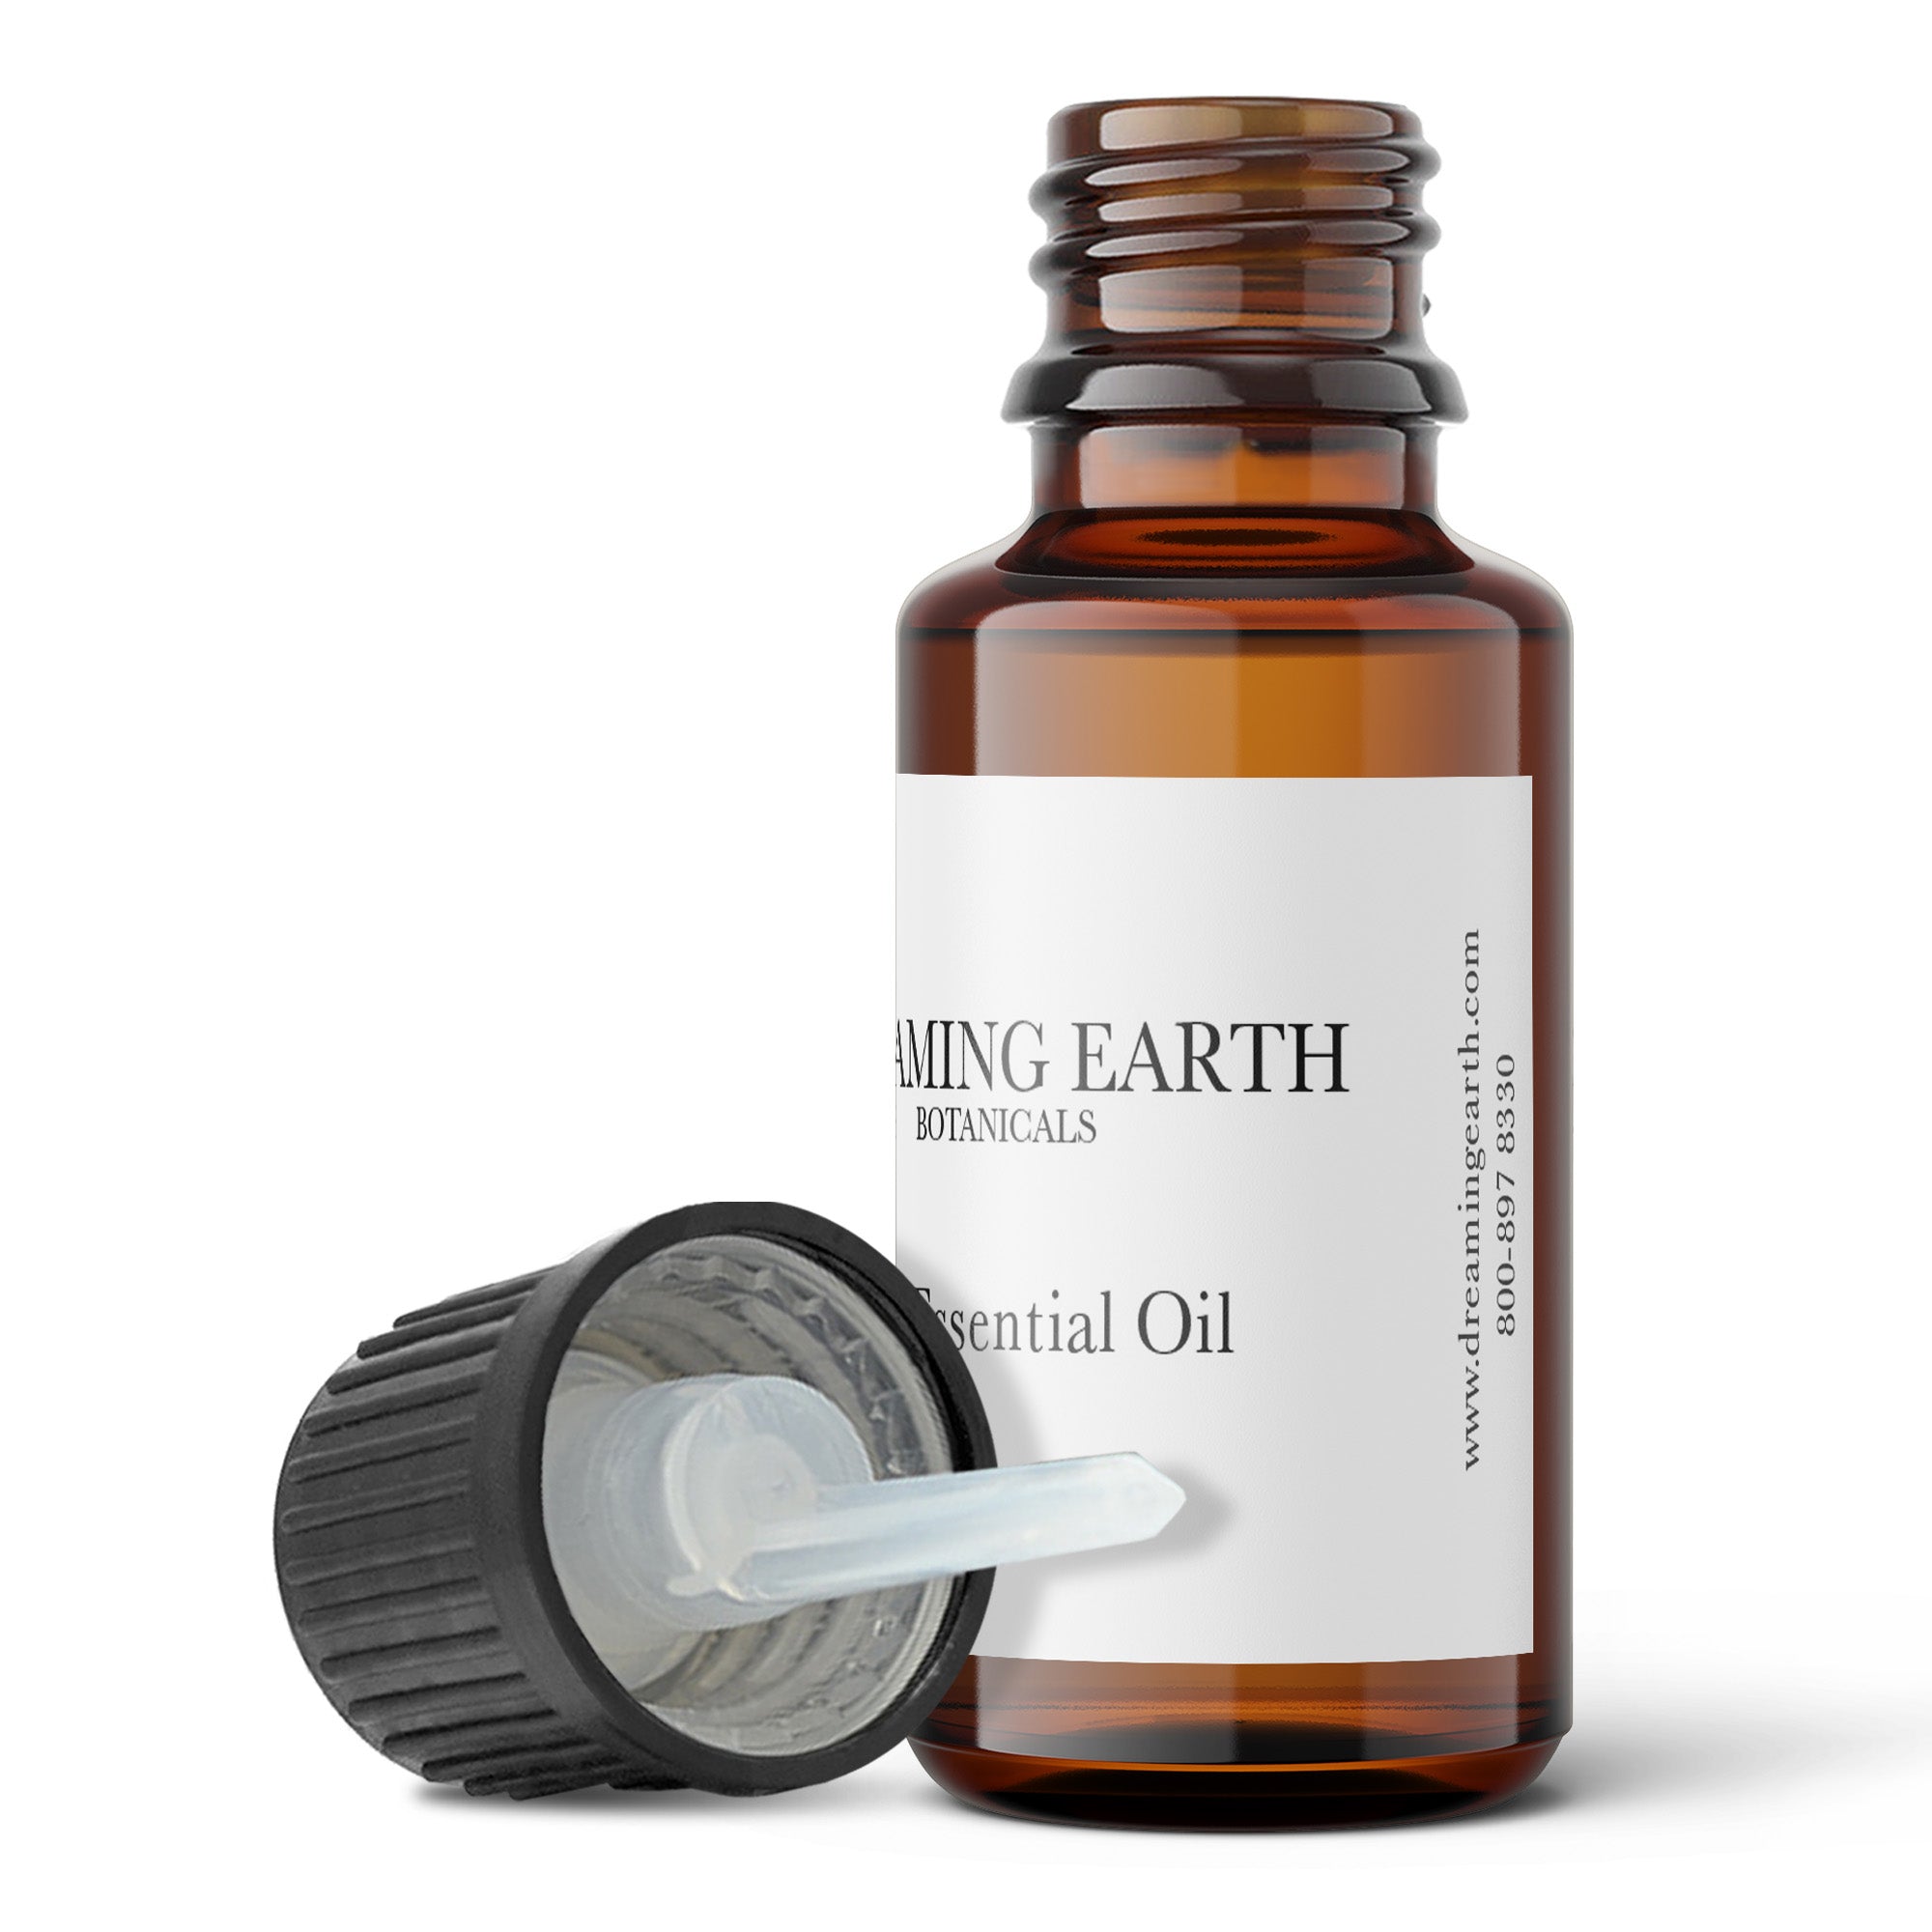 Load image into Gallery viewer, Tarragon Essential Oil - Dreaming Earth Inc
